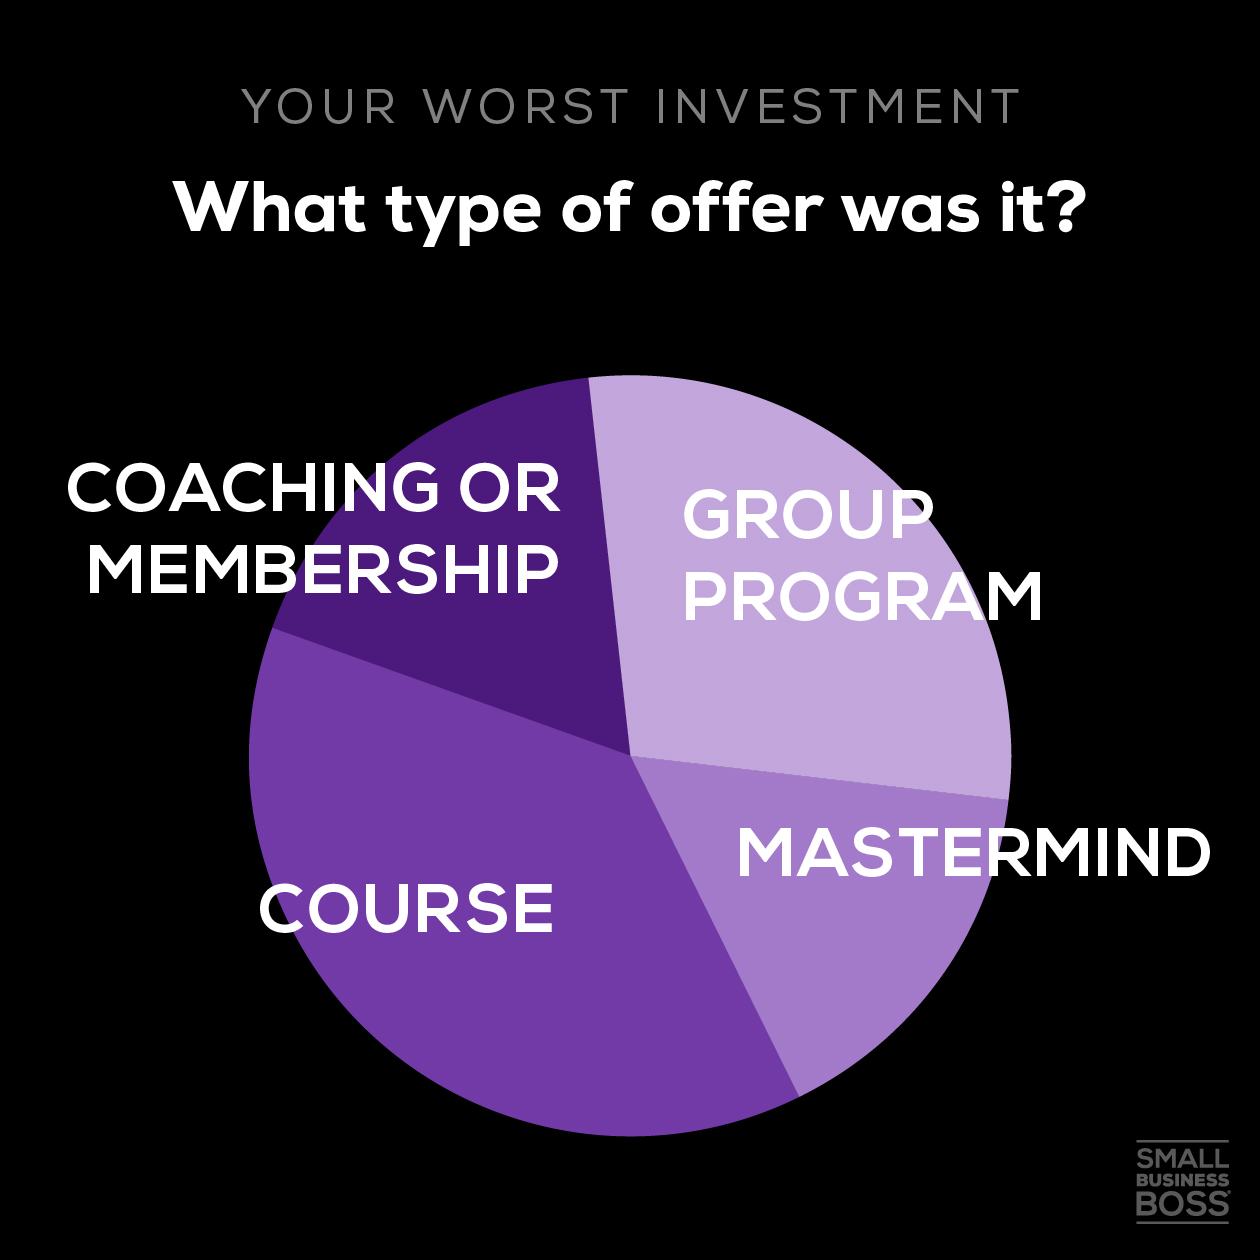 Worst investment-what type